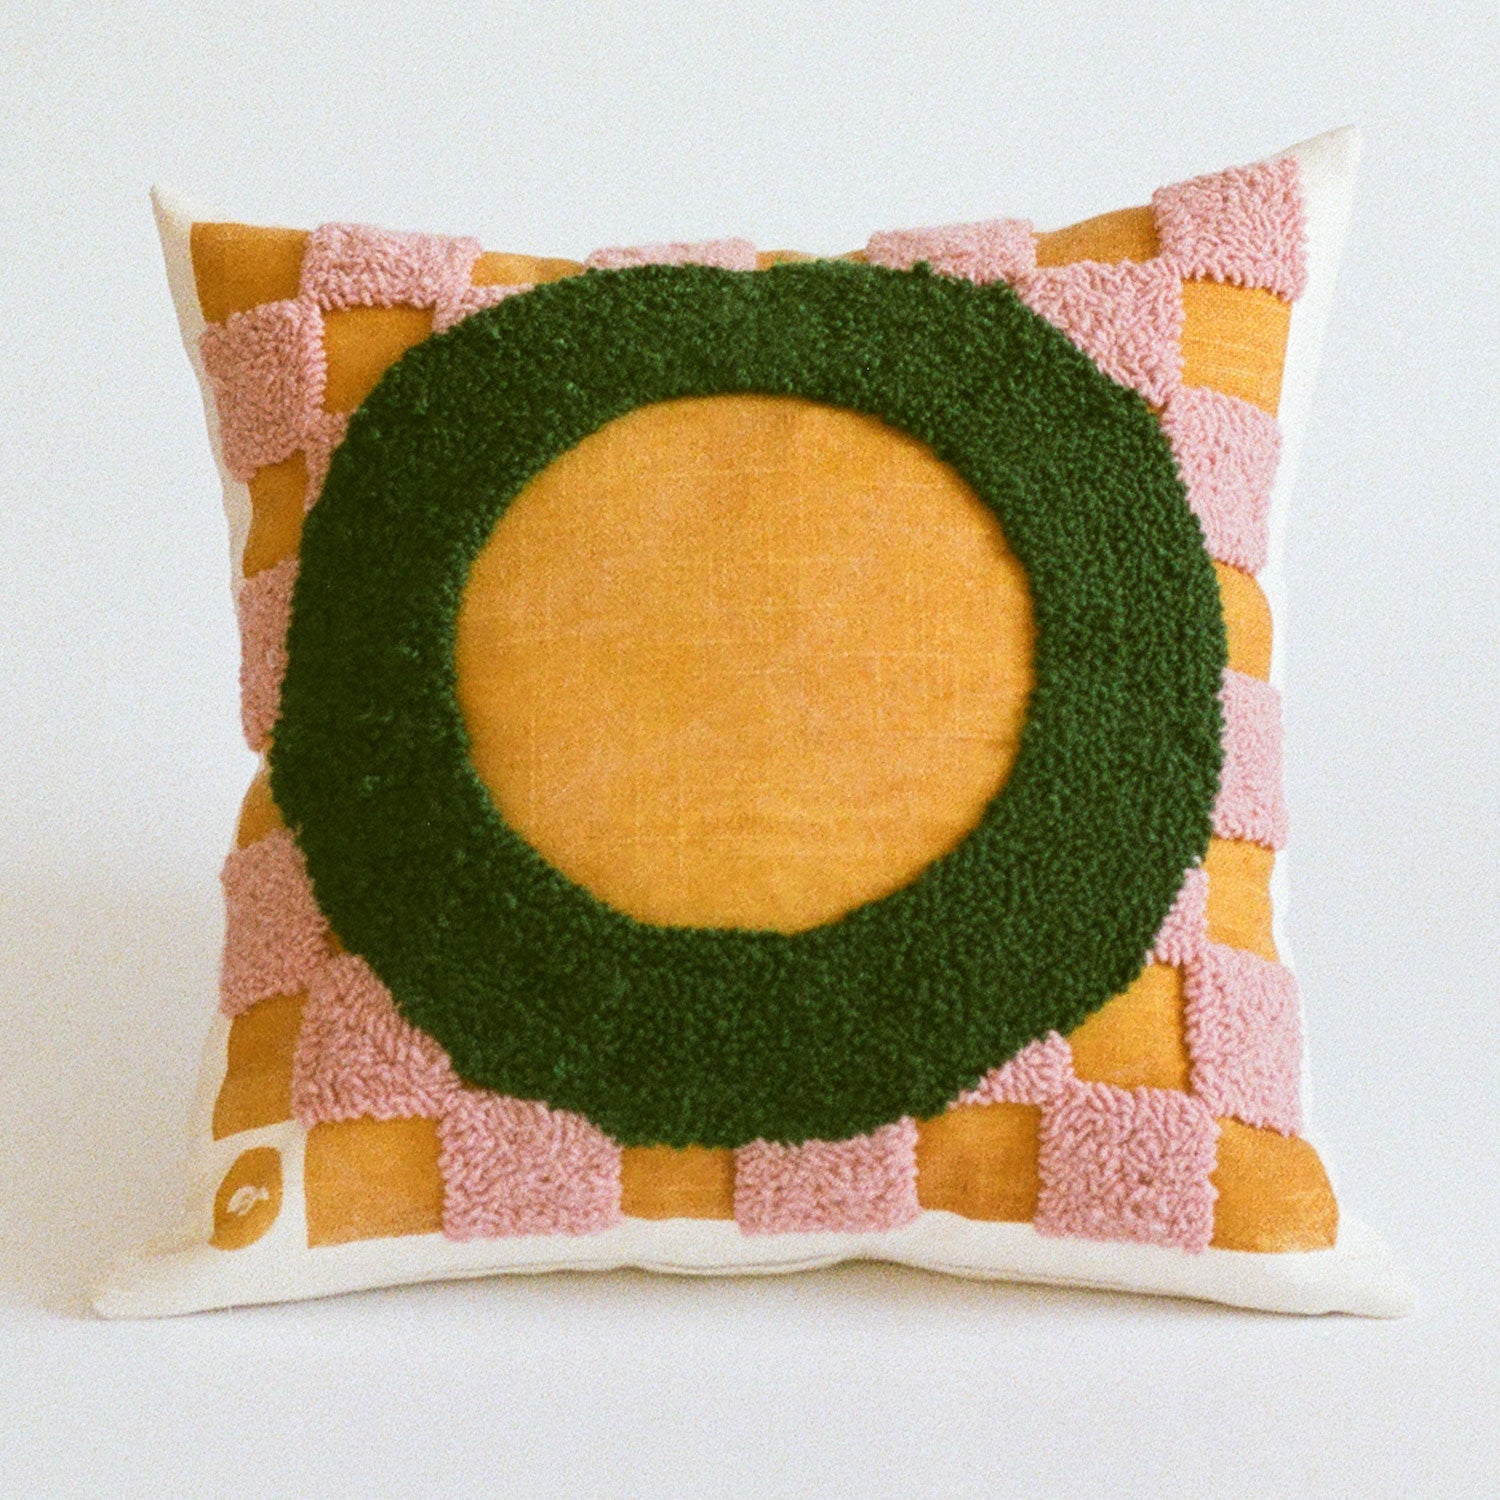 Needle Punched Pillow Cover in Pink and Yellow Check